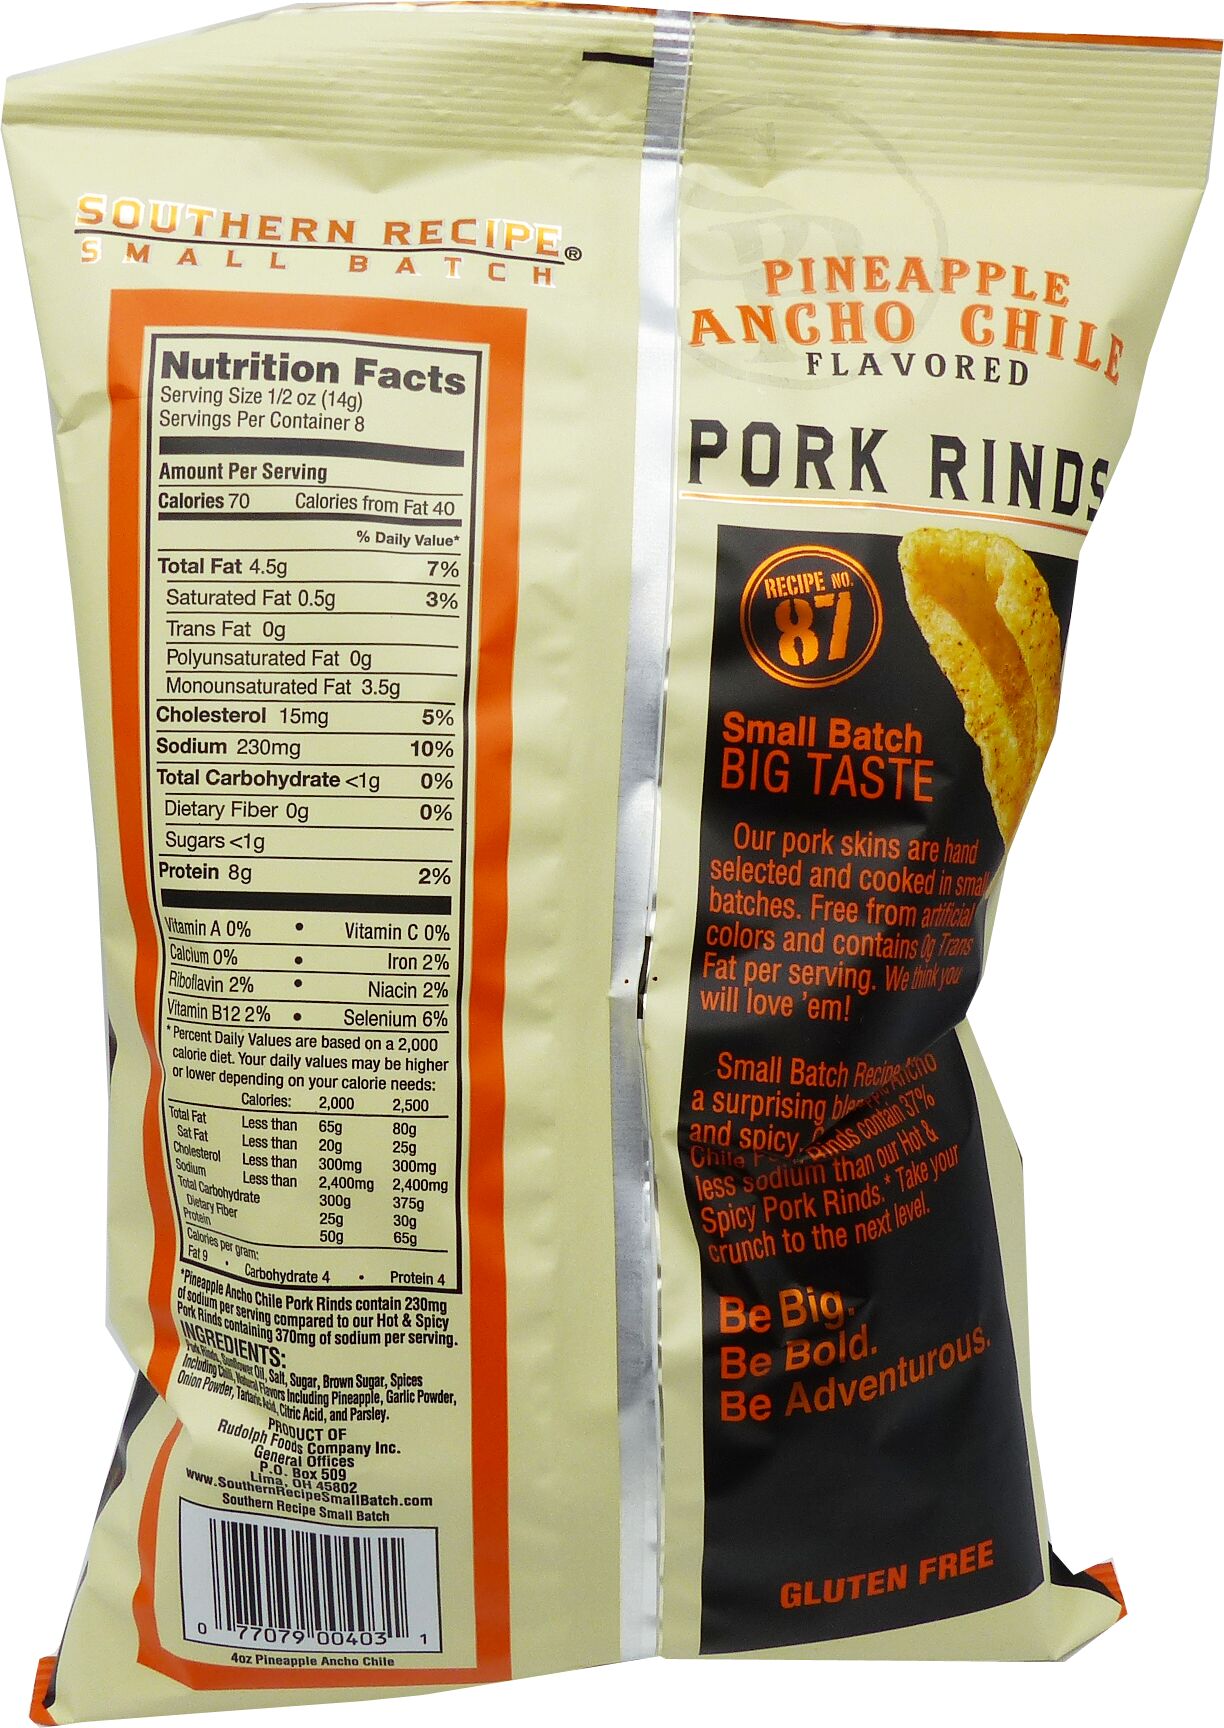 #Flavor_Pineapple Ancho Chile, 4 oz